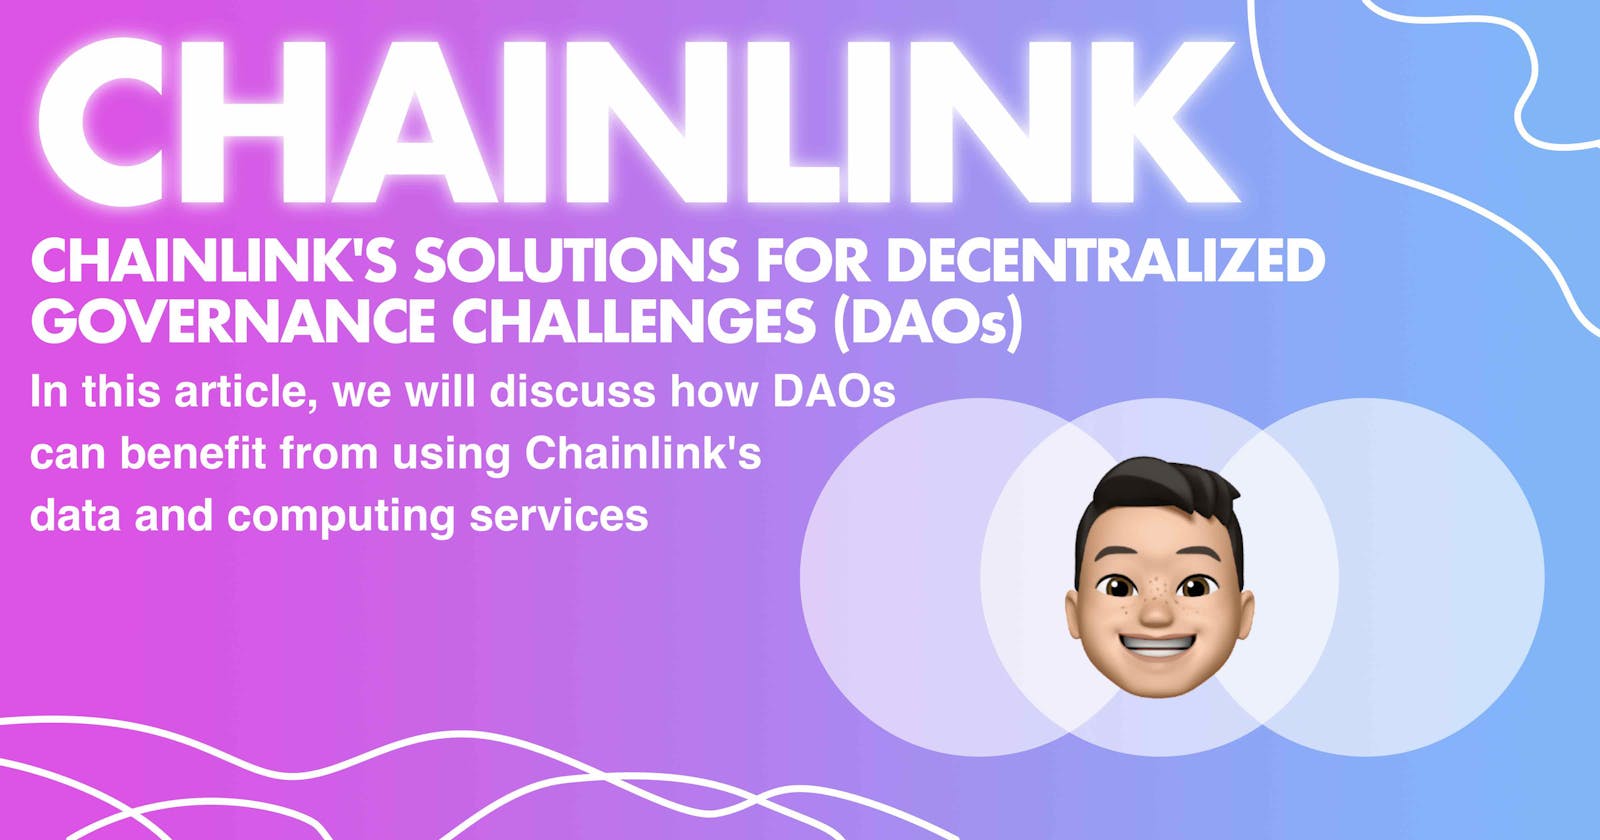 Chainlink's solutions for decentralized governance challenges